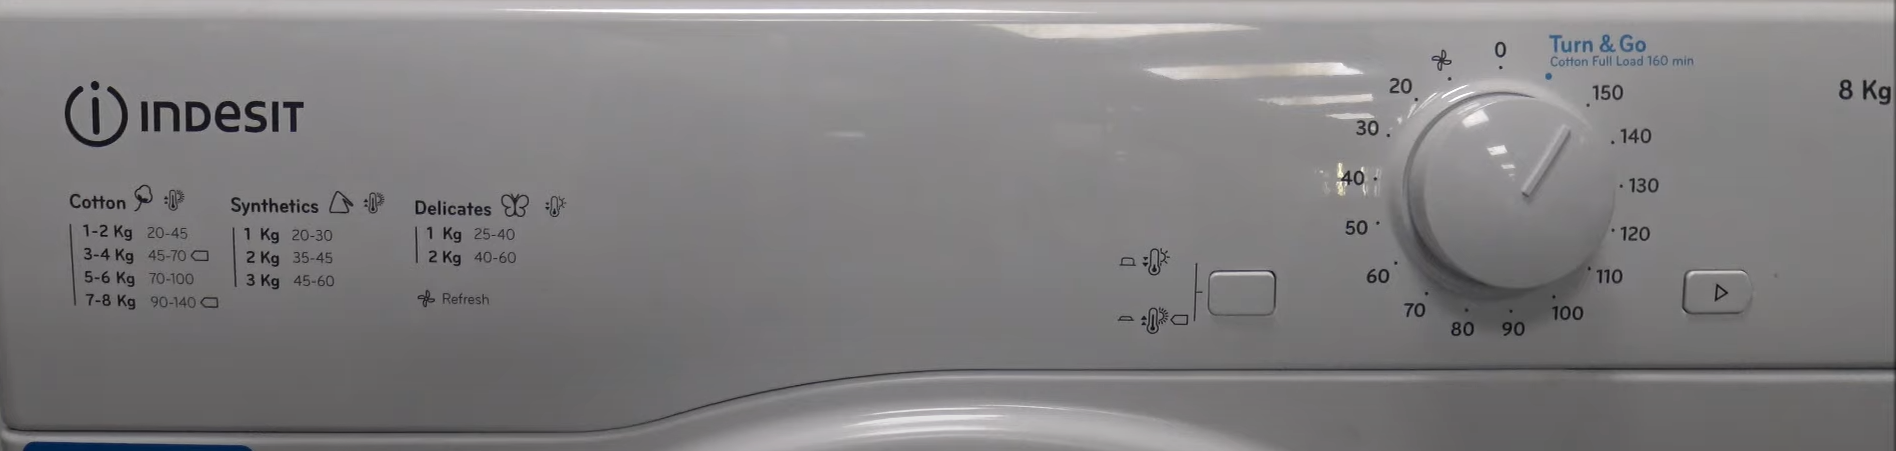 Indesit Tumble Dryer with control panel